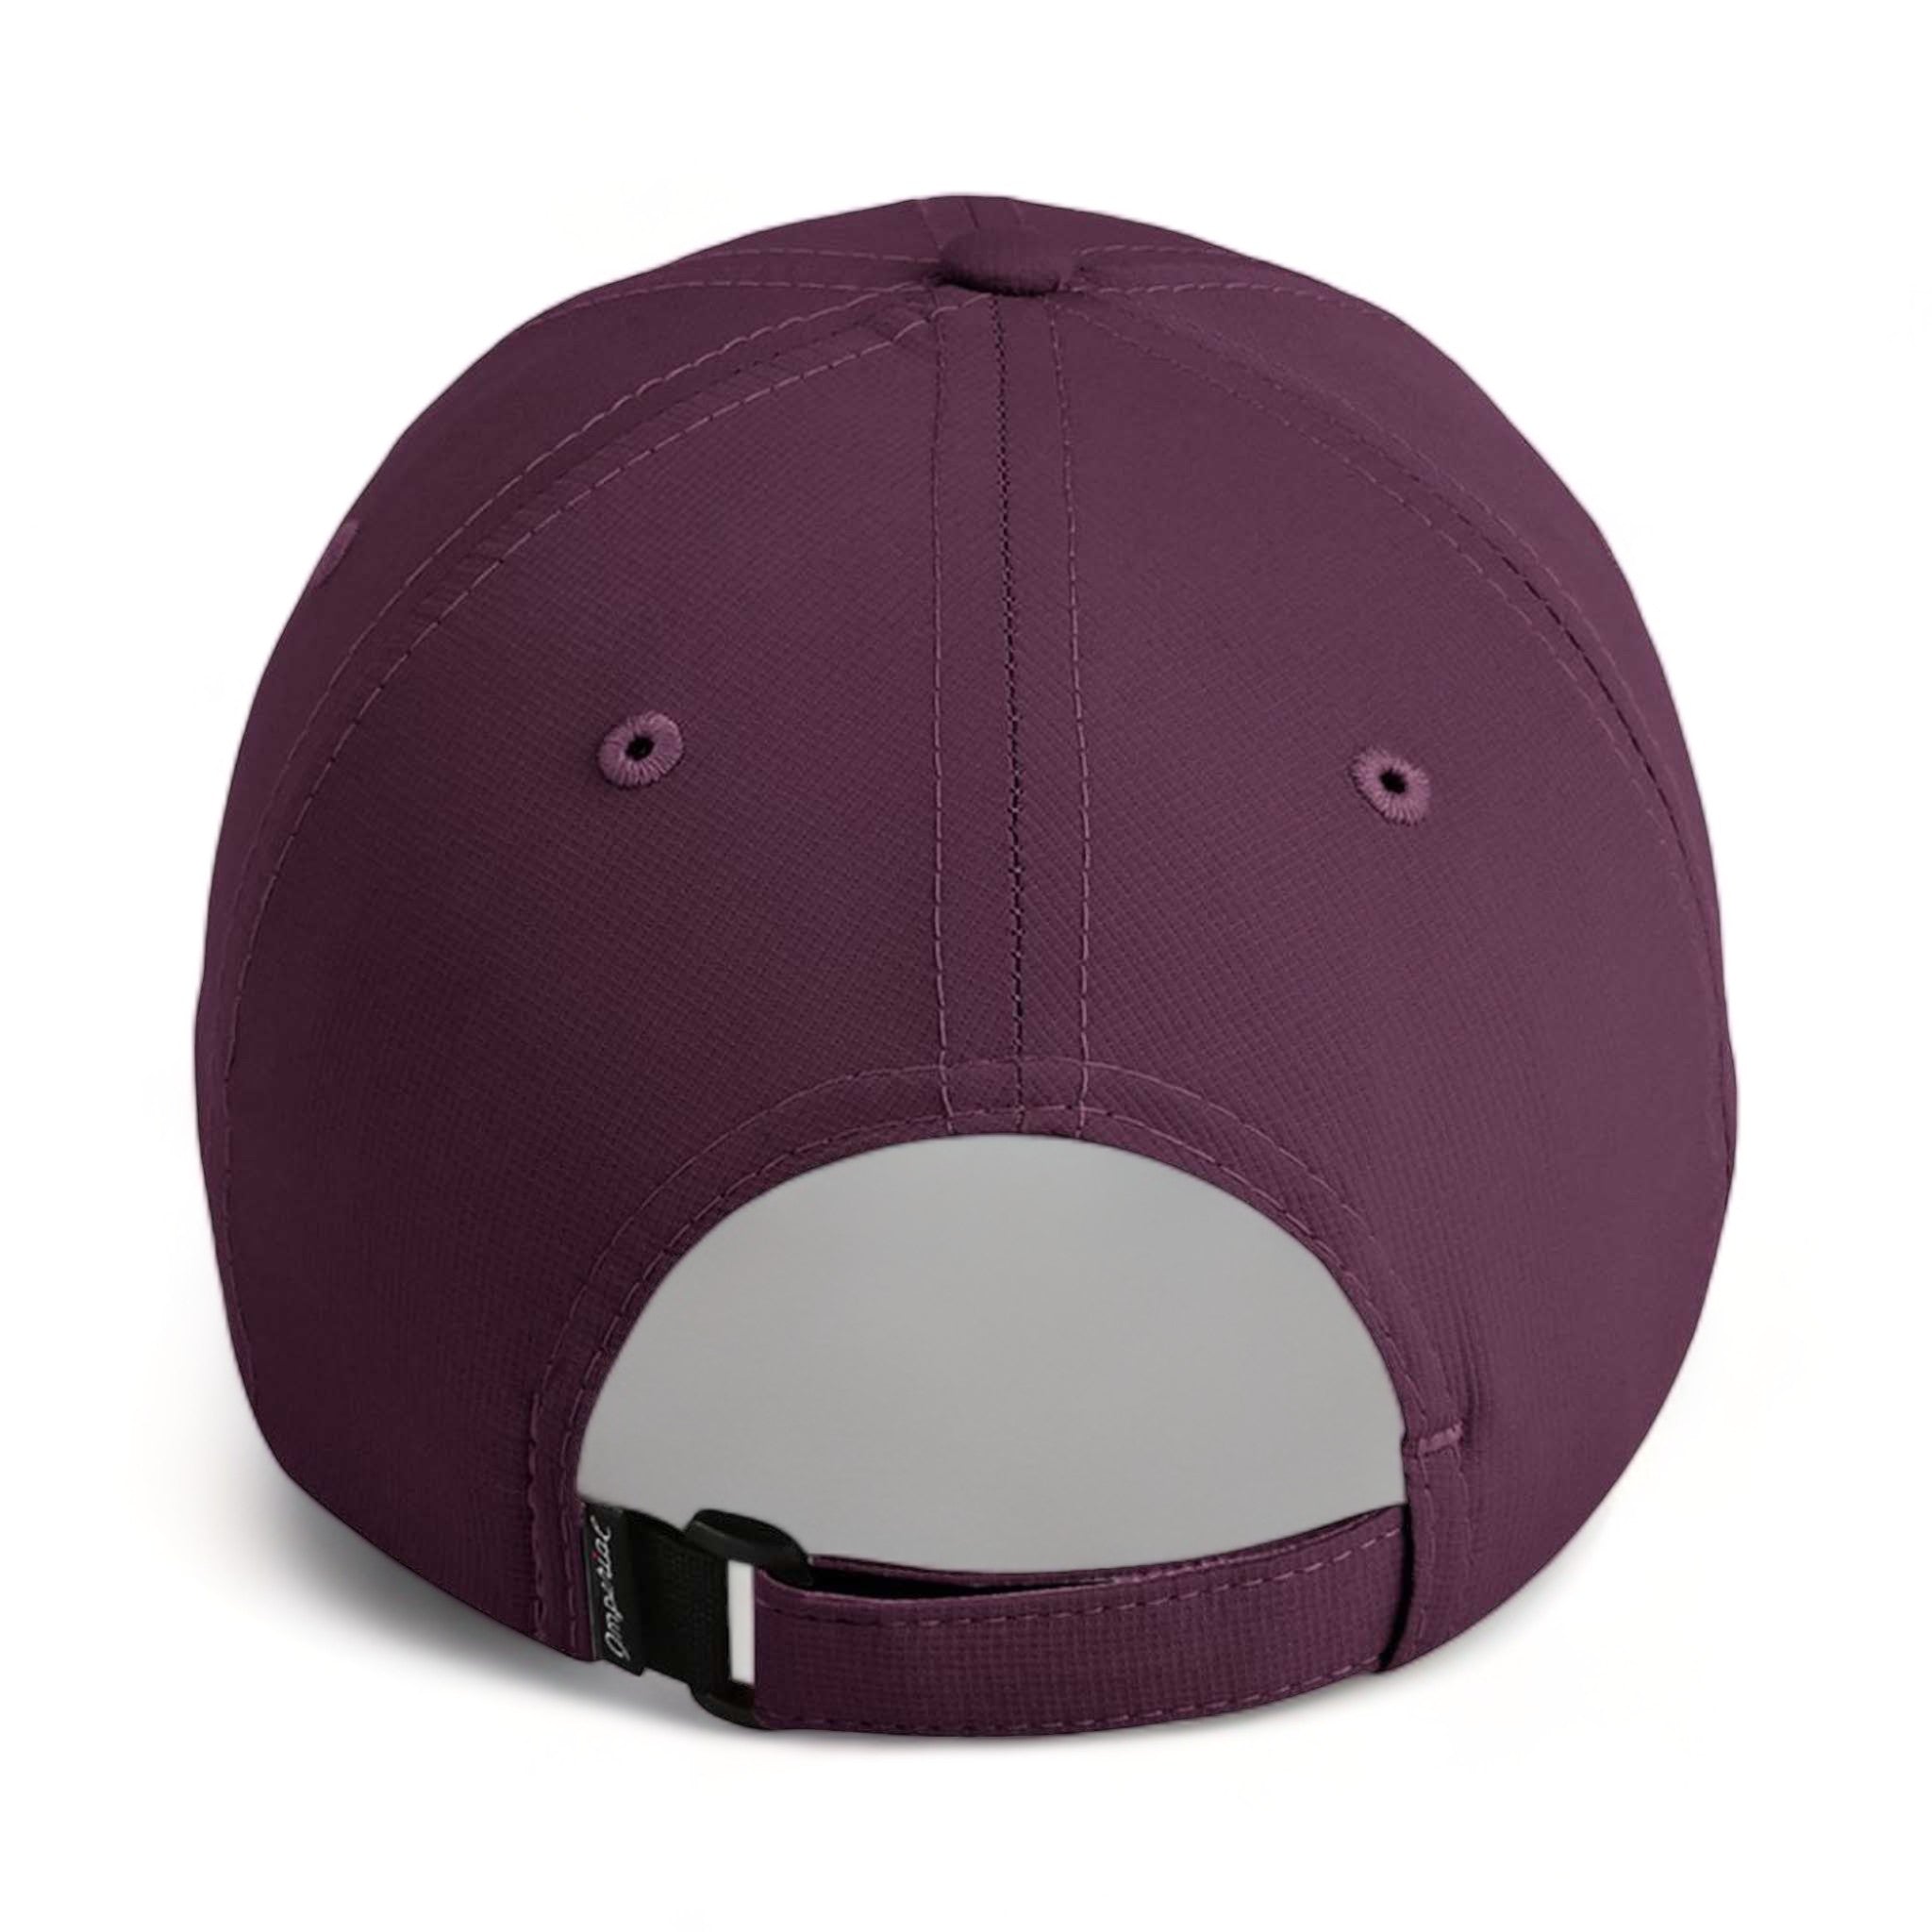 Back view of Imperial X210P custom hat in aubergine